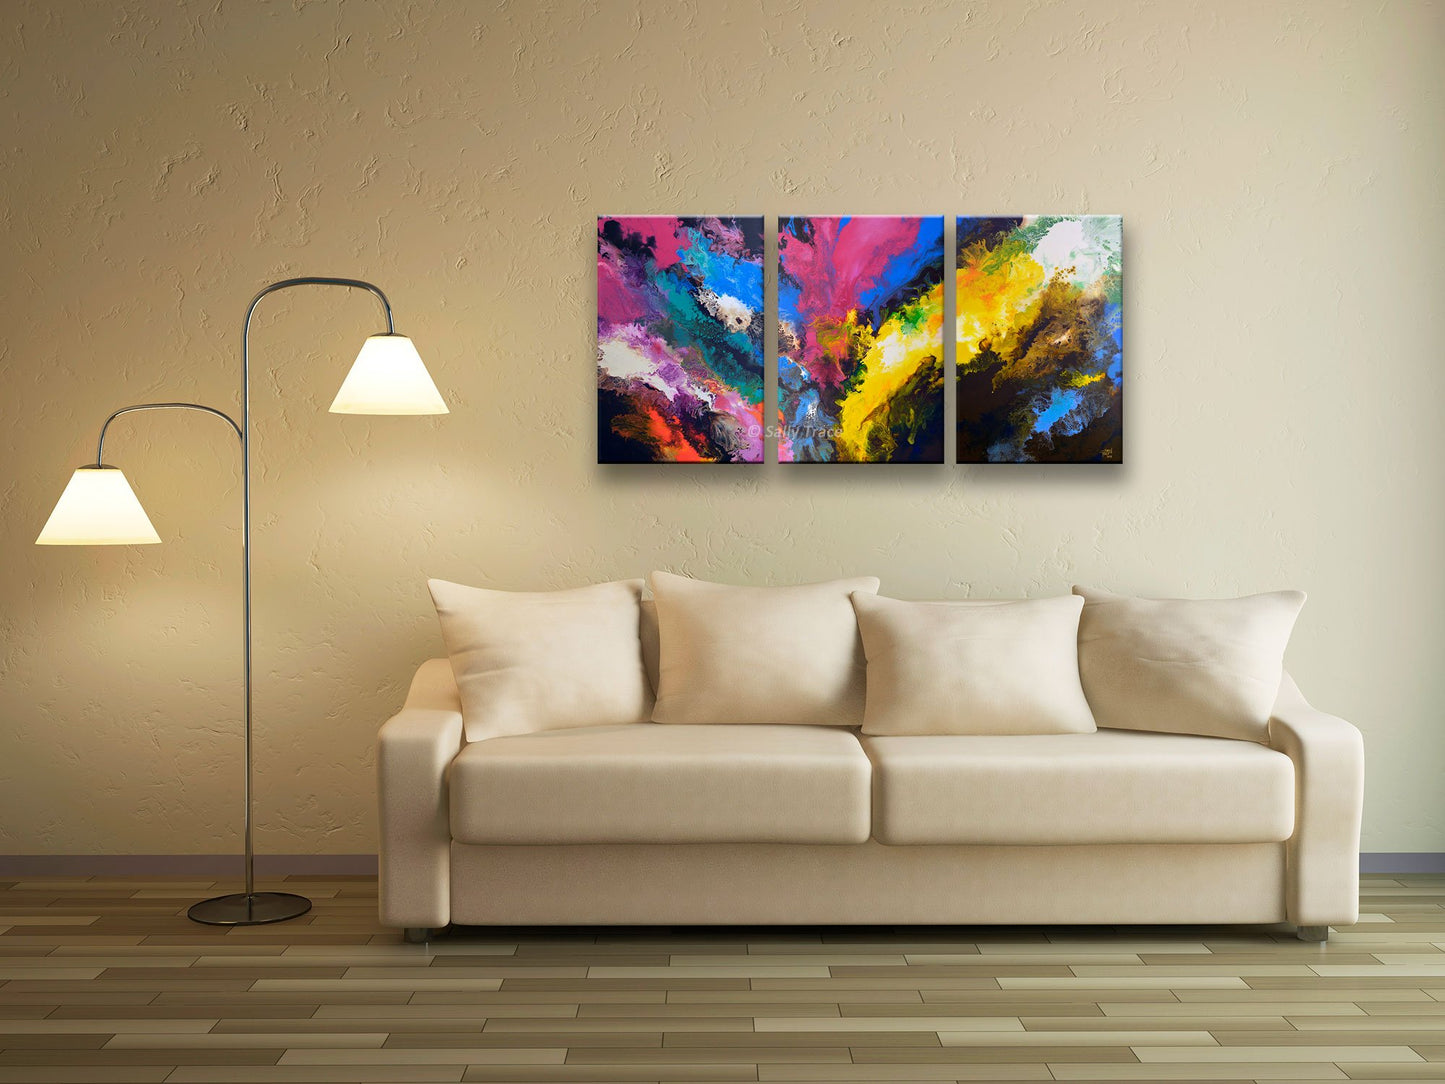 Ulysses 5, giclee prints on canvas from the original triptych fluid abstract painting by Sally Trace